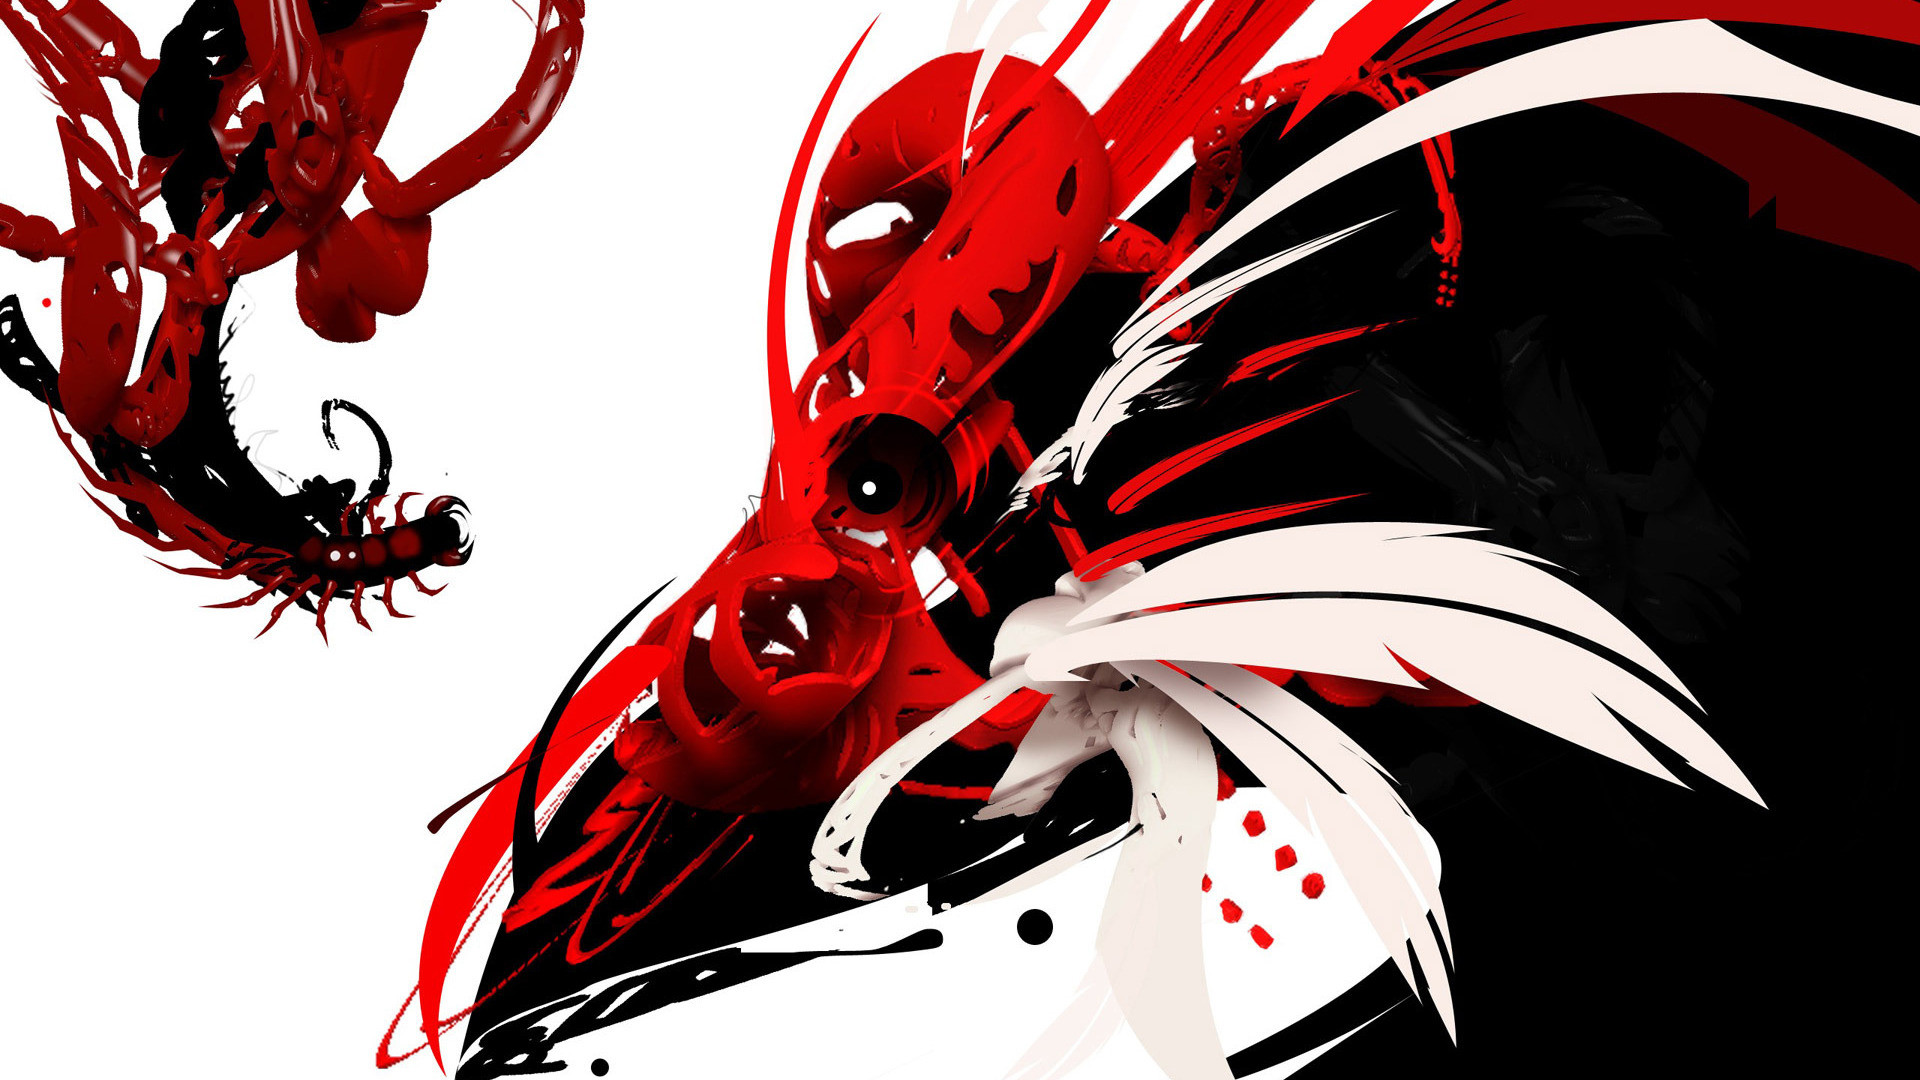 Black And Red Dragon Wallpaper Black White And Red - Hd Wallpaper Black And White Red - HD Wallpaper 